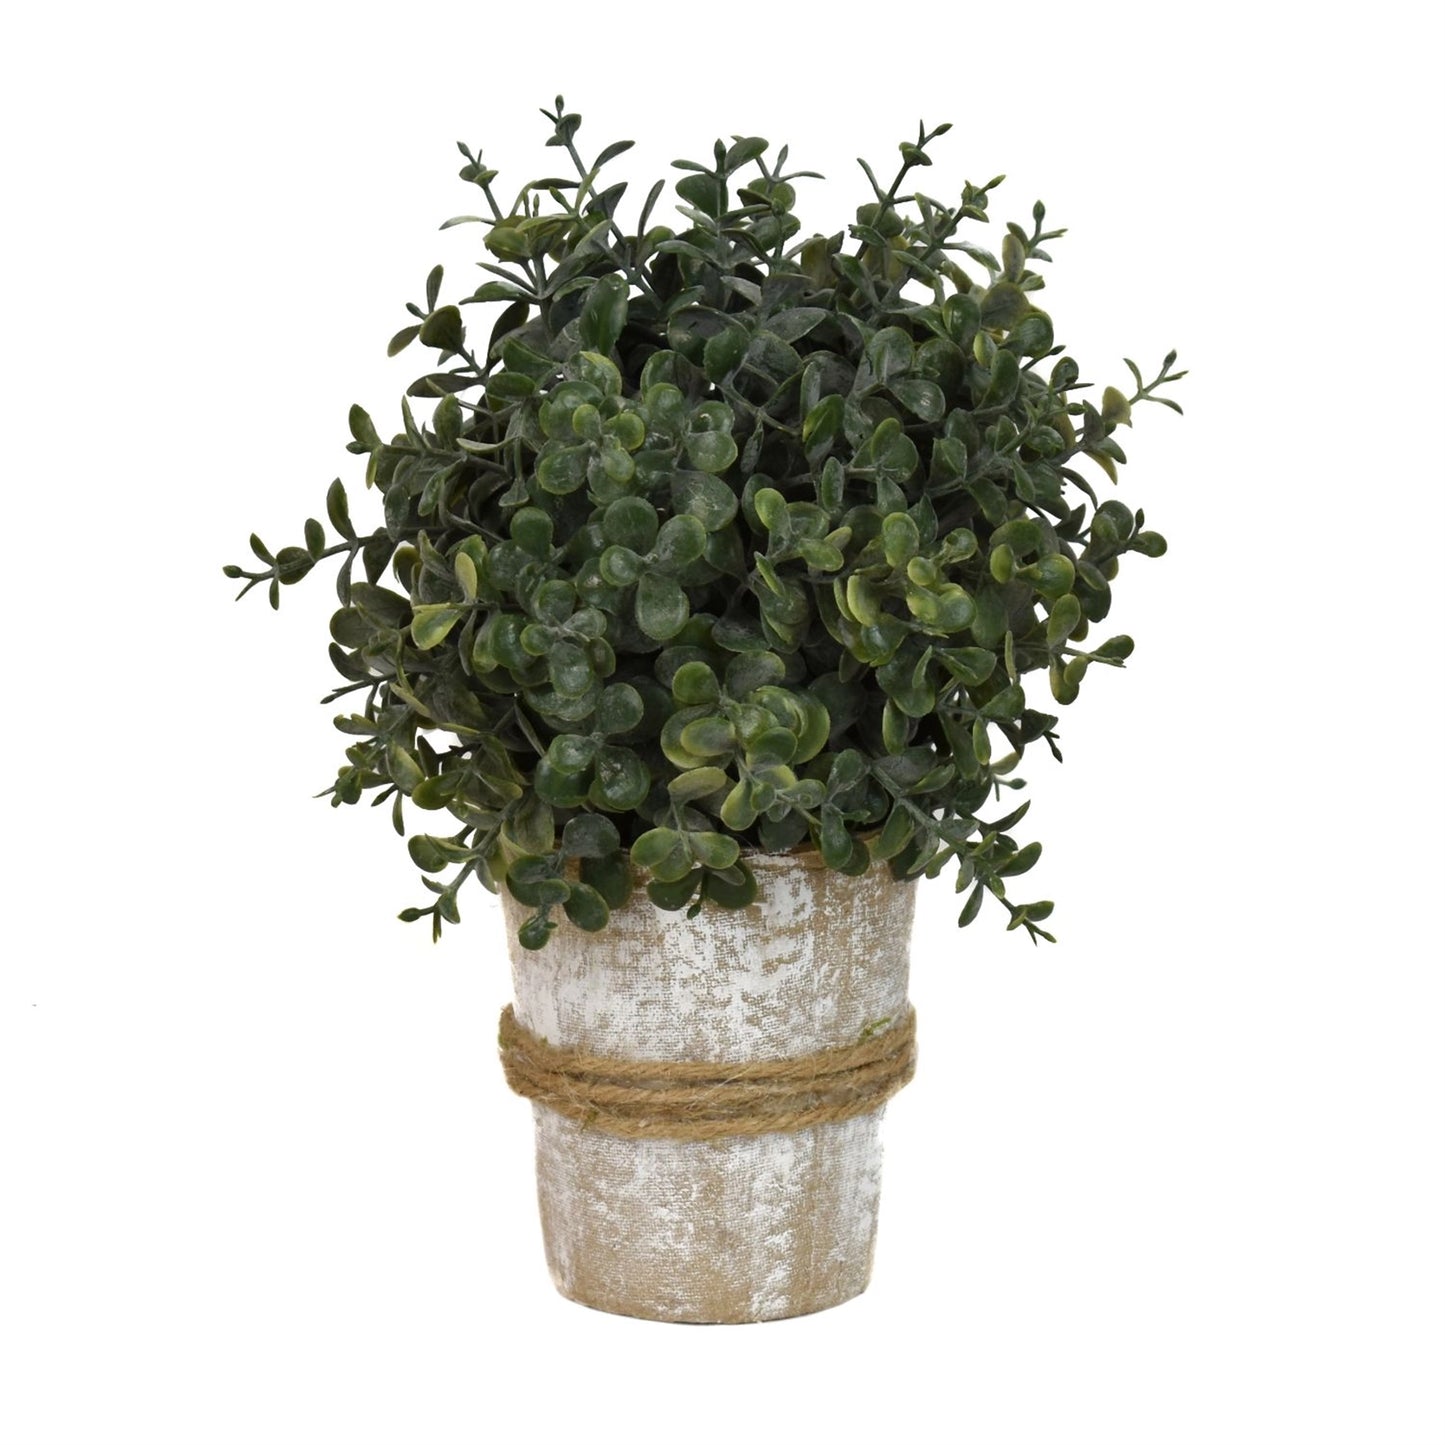 8.5” Tea Leaf Ball Potted Topiary